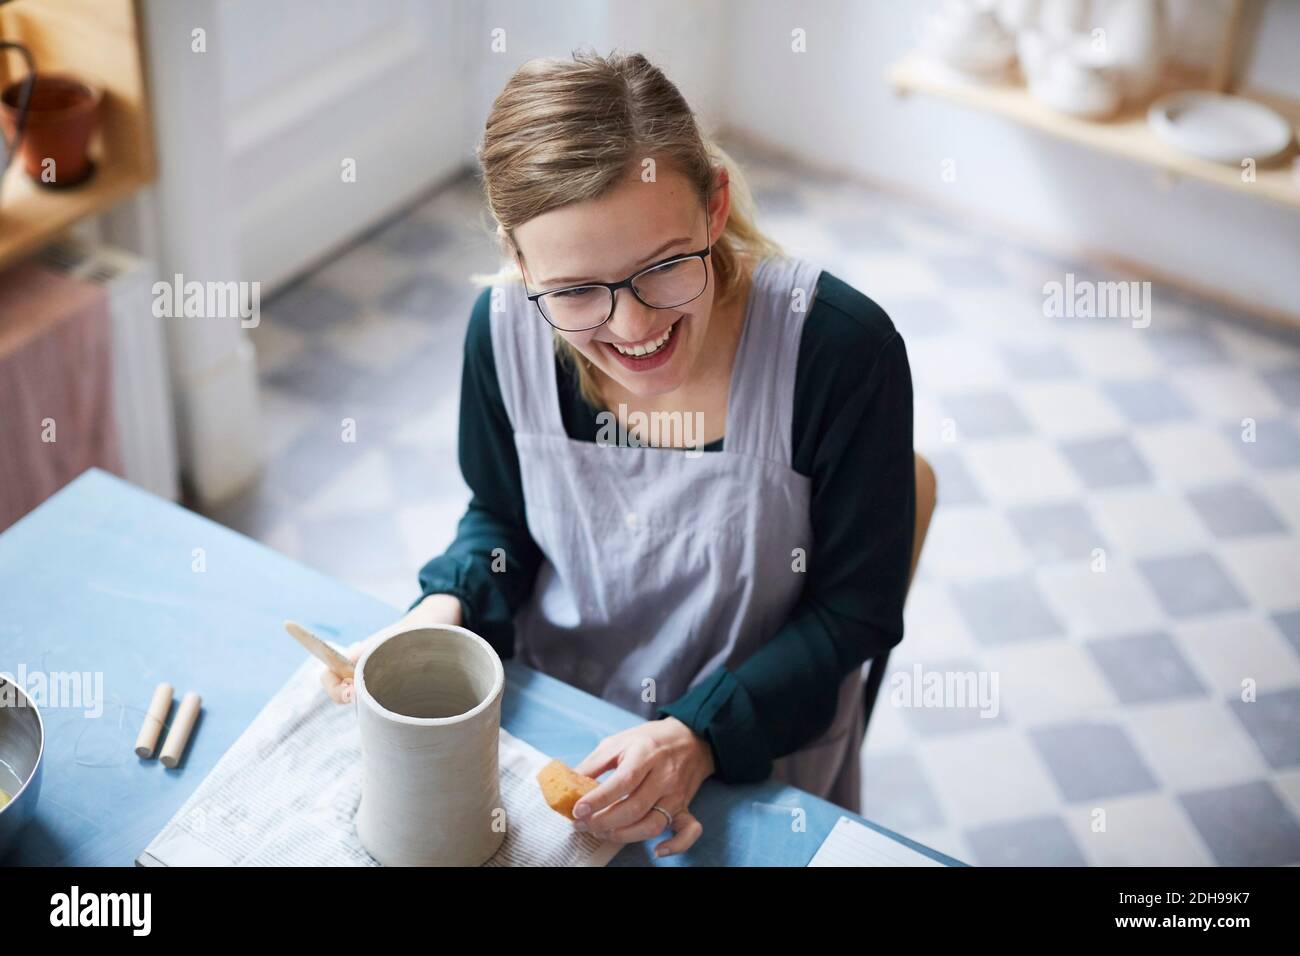 High angle view of smiling woman learning pottery in art class Stock Photo